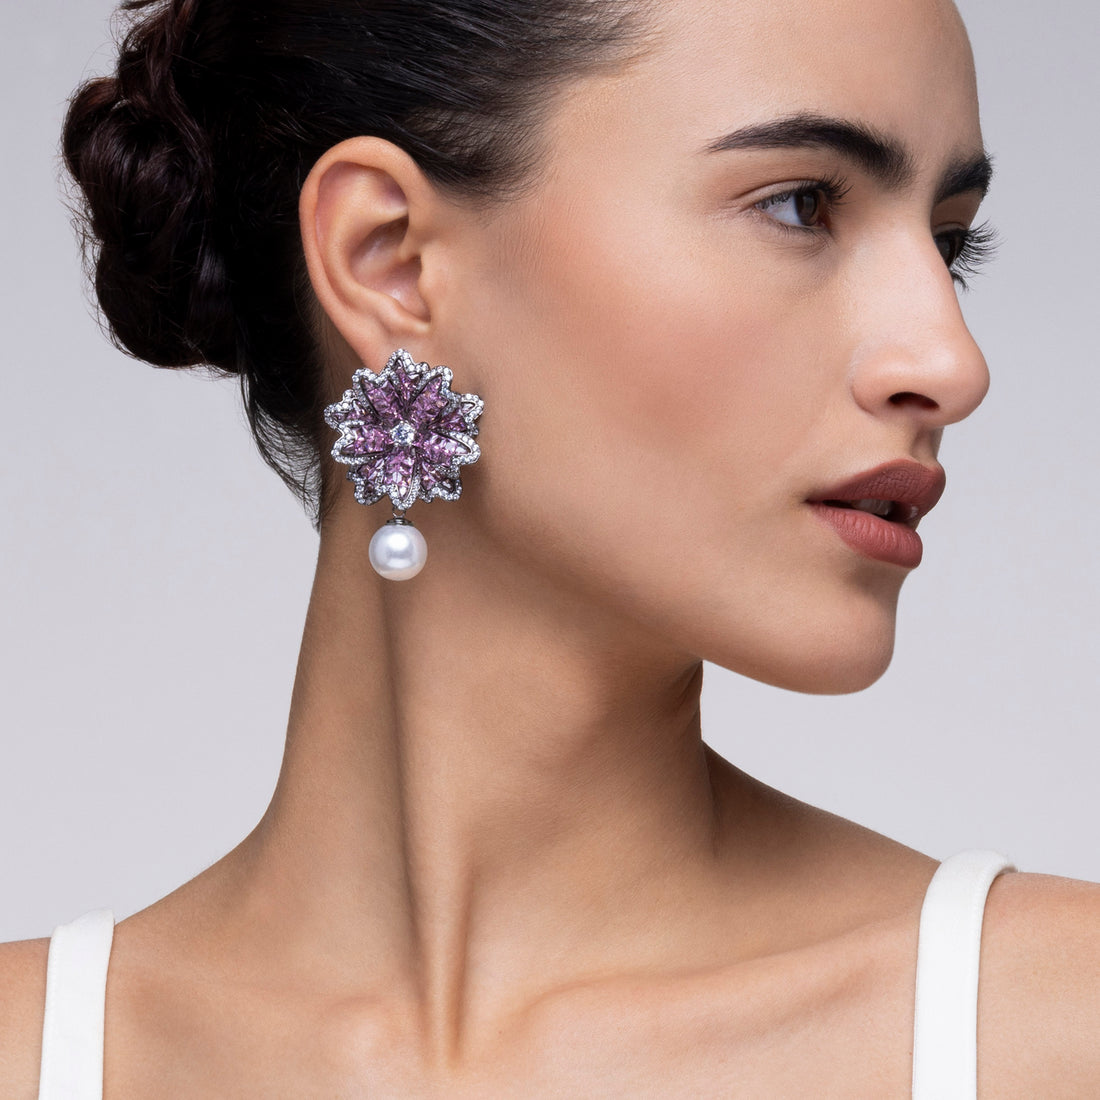 Stunning Statement Earrings BY PRAO